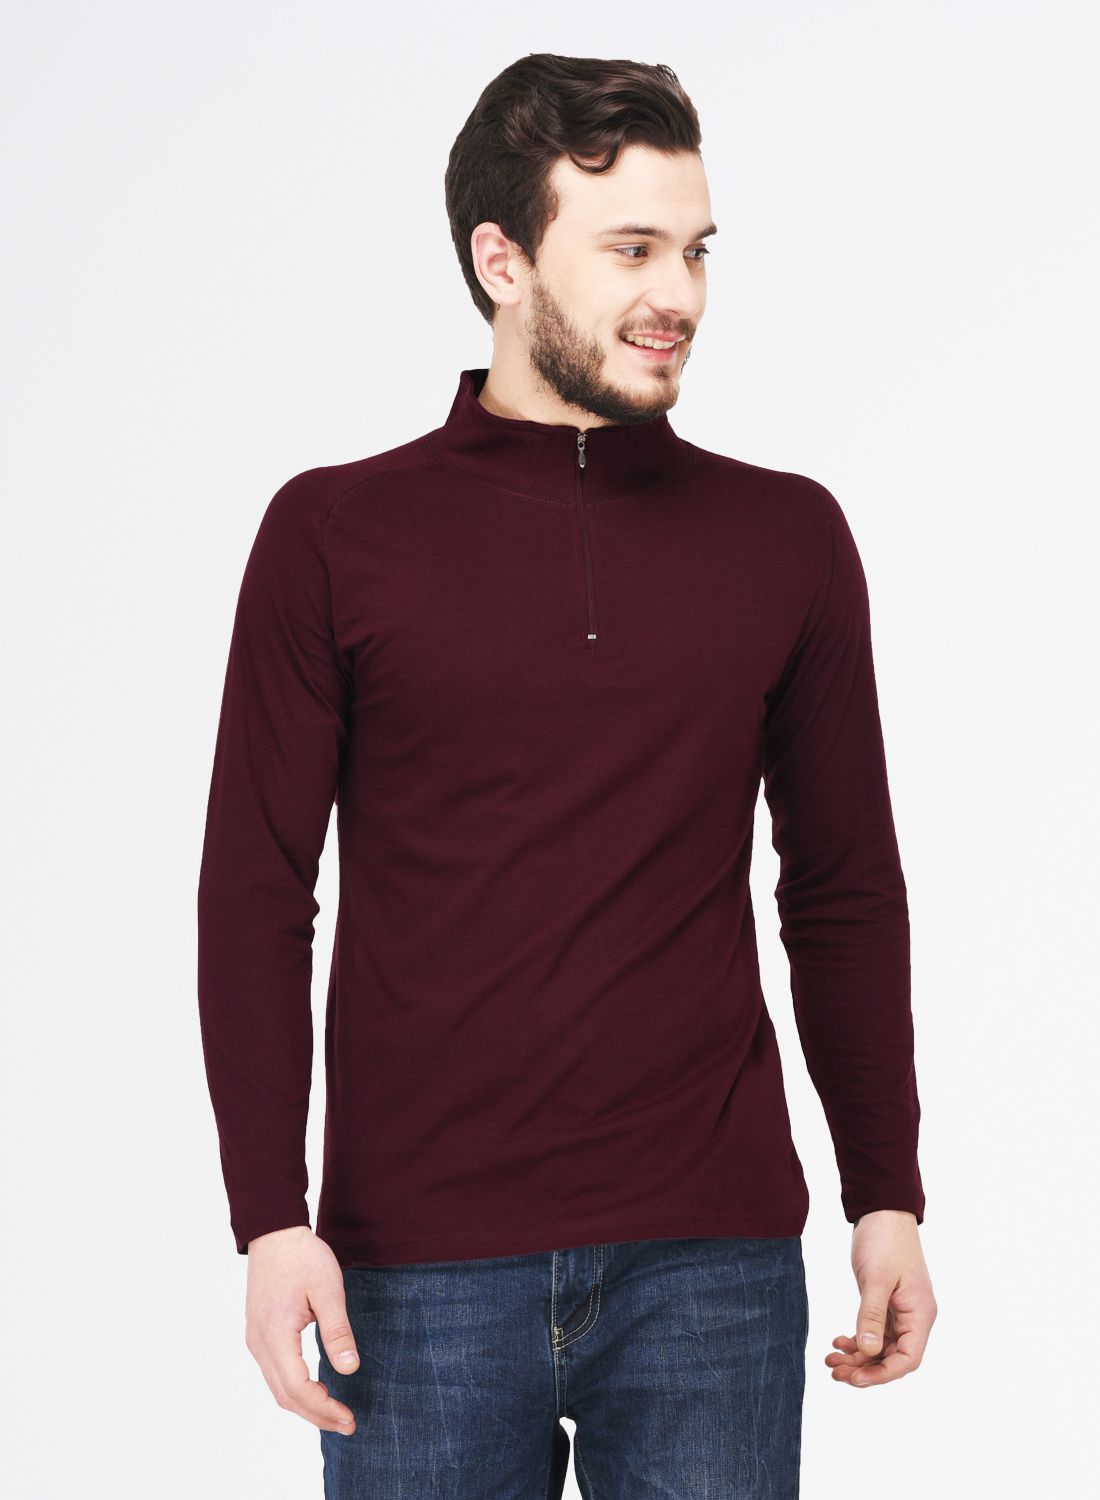     			Ap'pulse Maroon Round T-Shirt Pack of 1